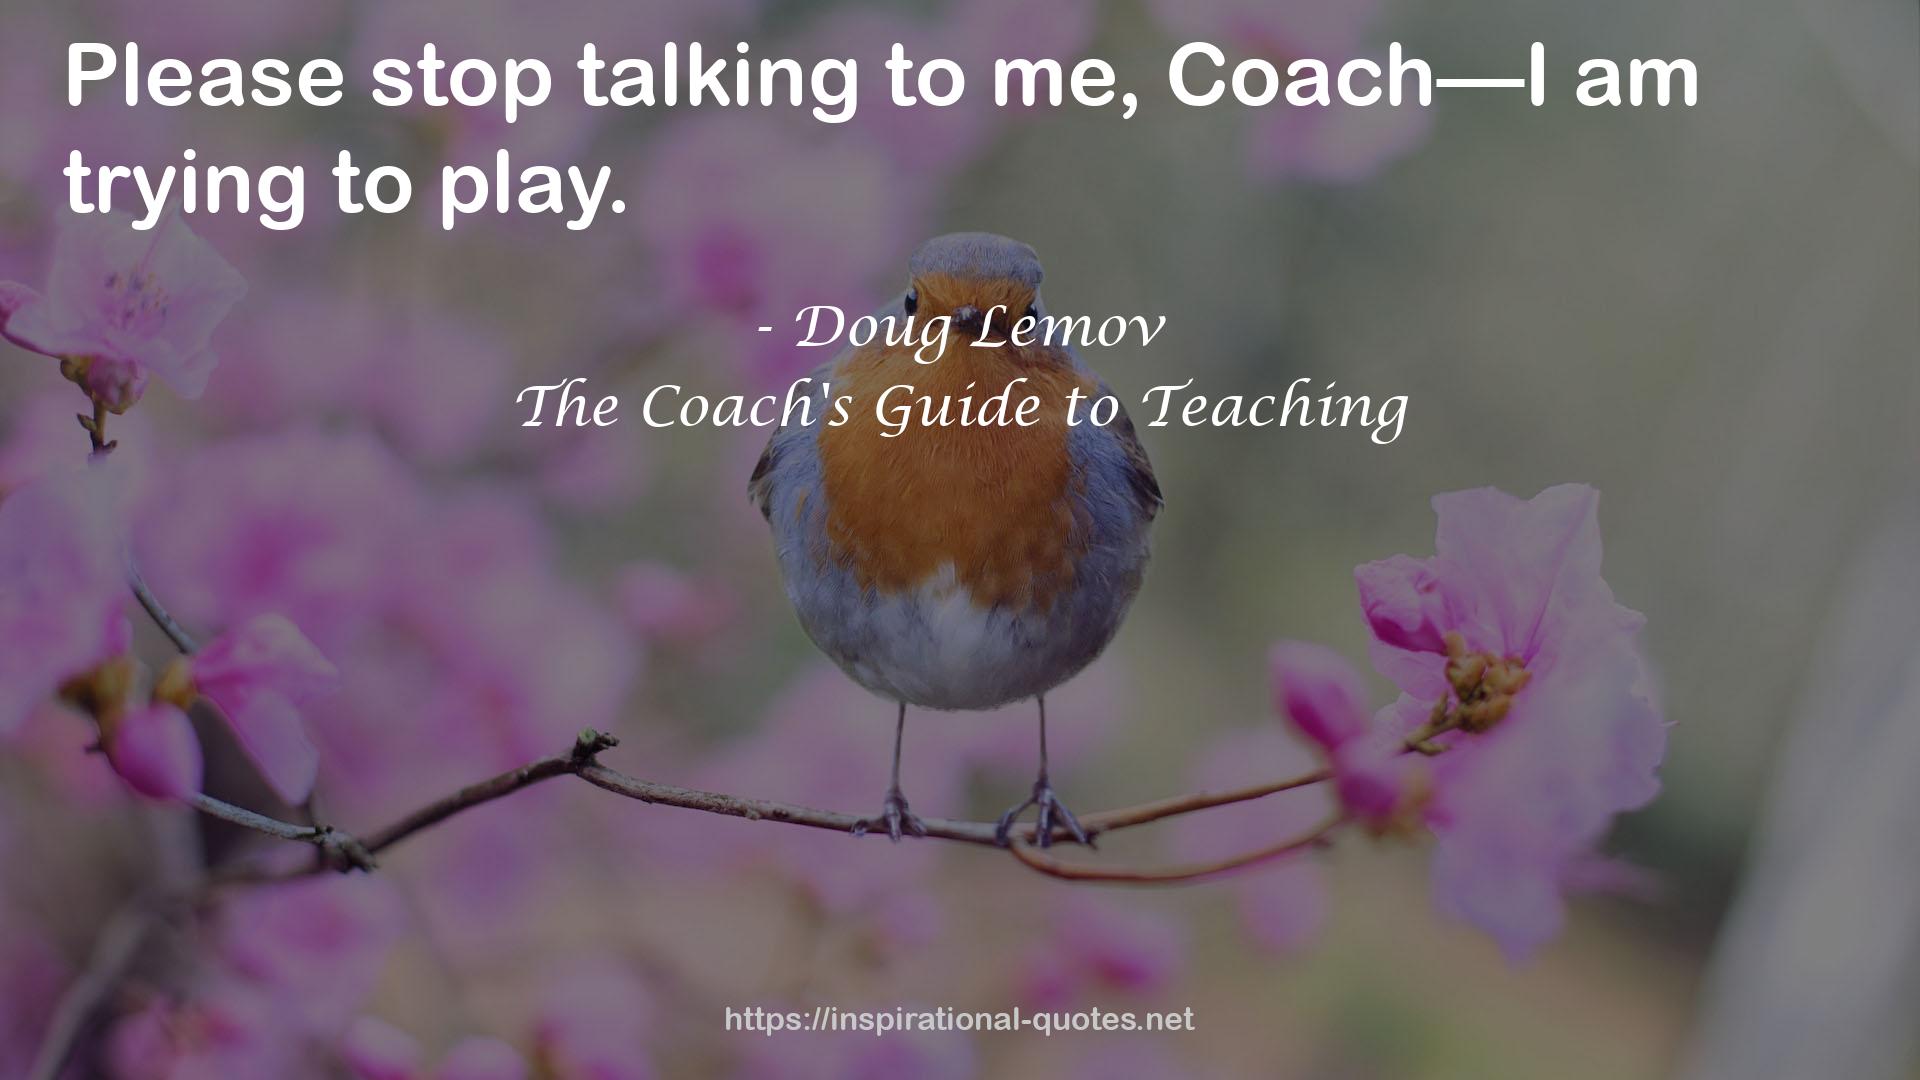 The Coach's Guide to Teaching QUOTES